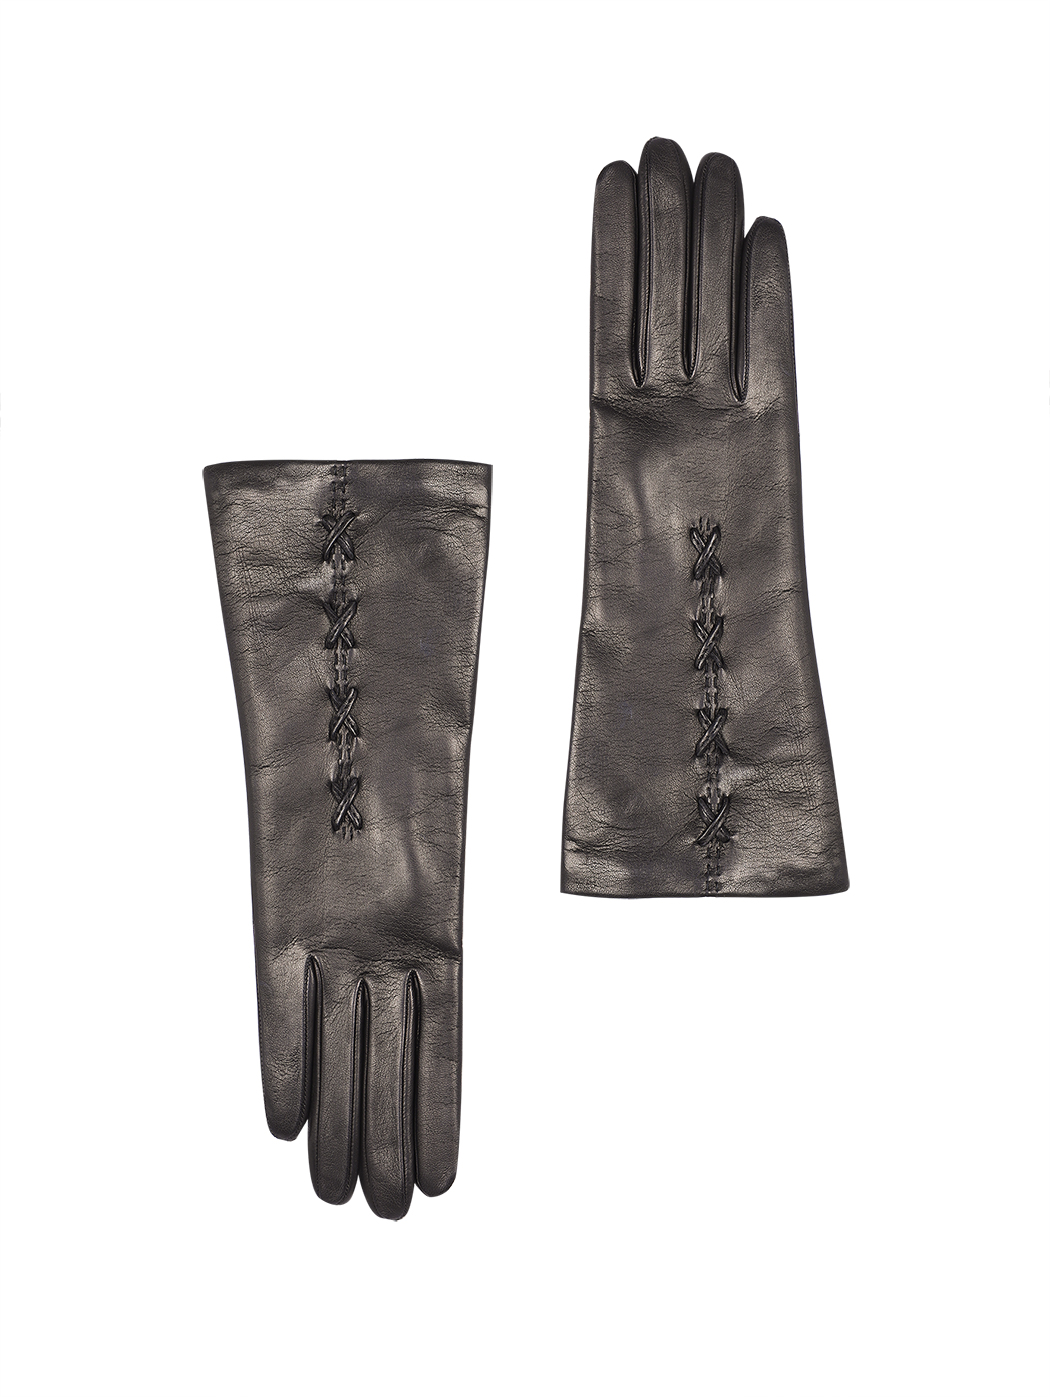 Long Nappa Leather Gloves Cashmere Lined Black